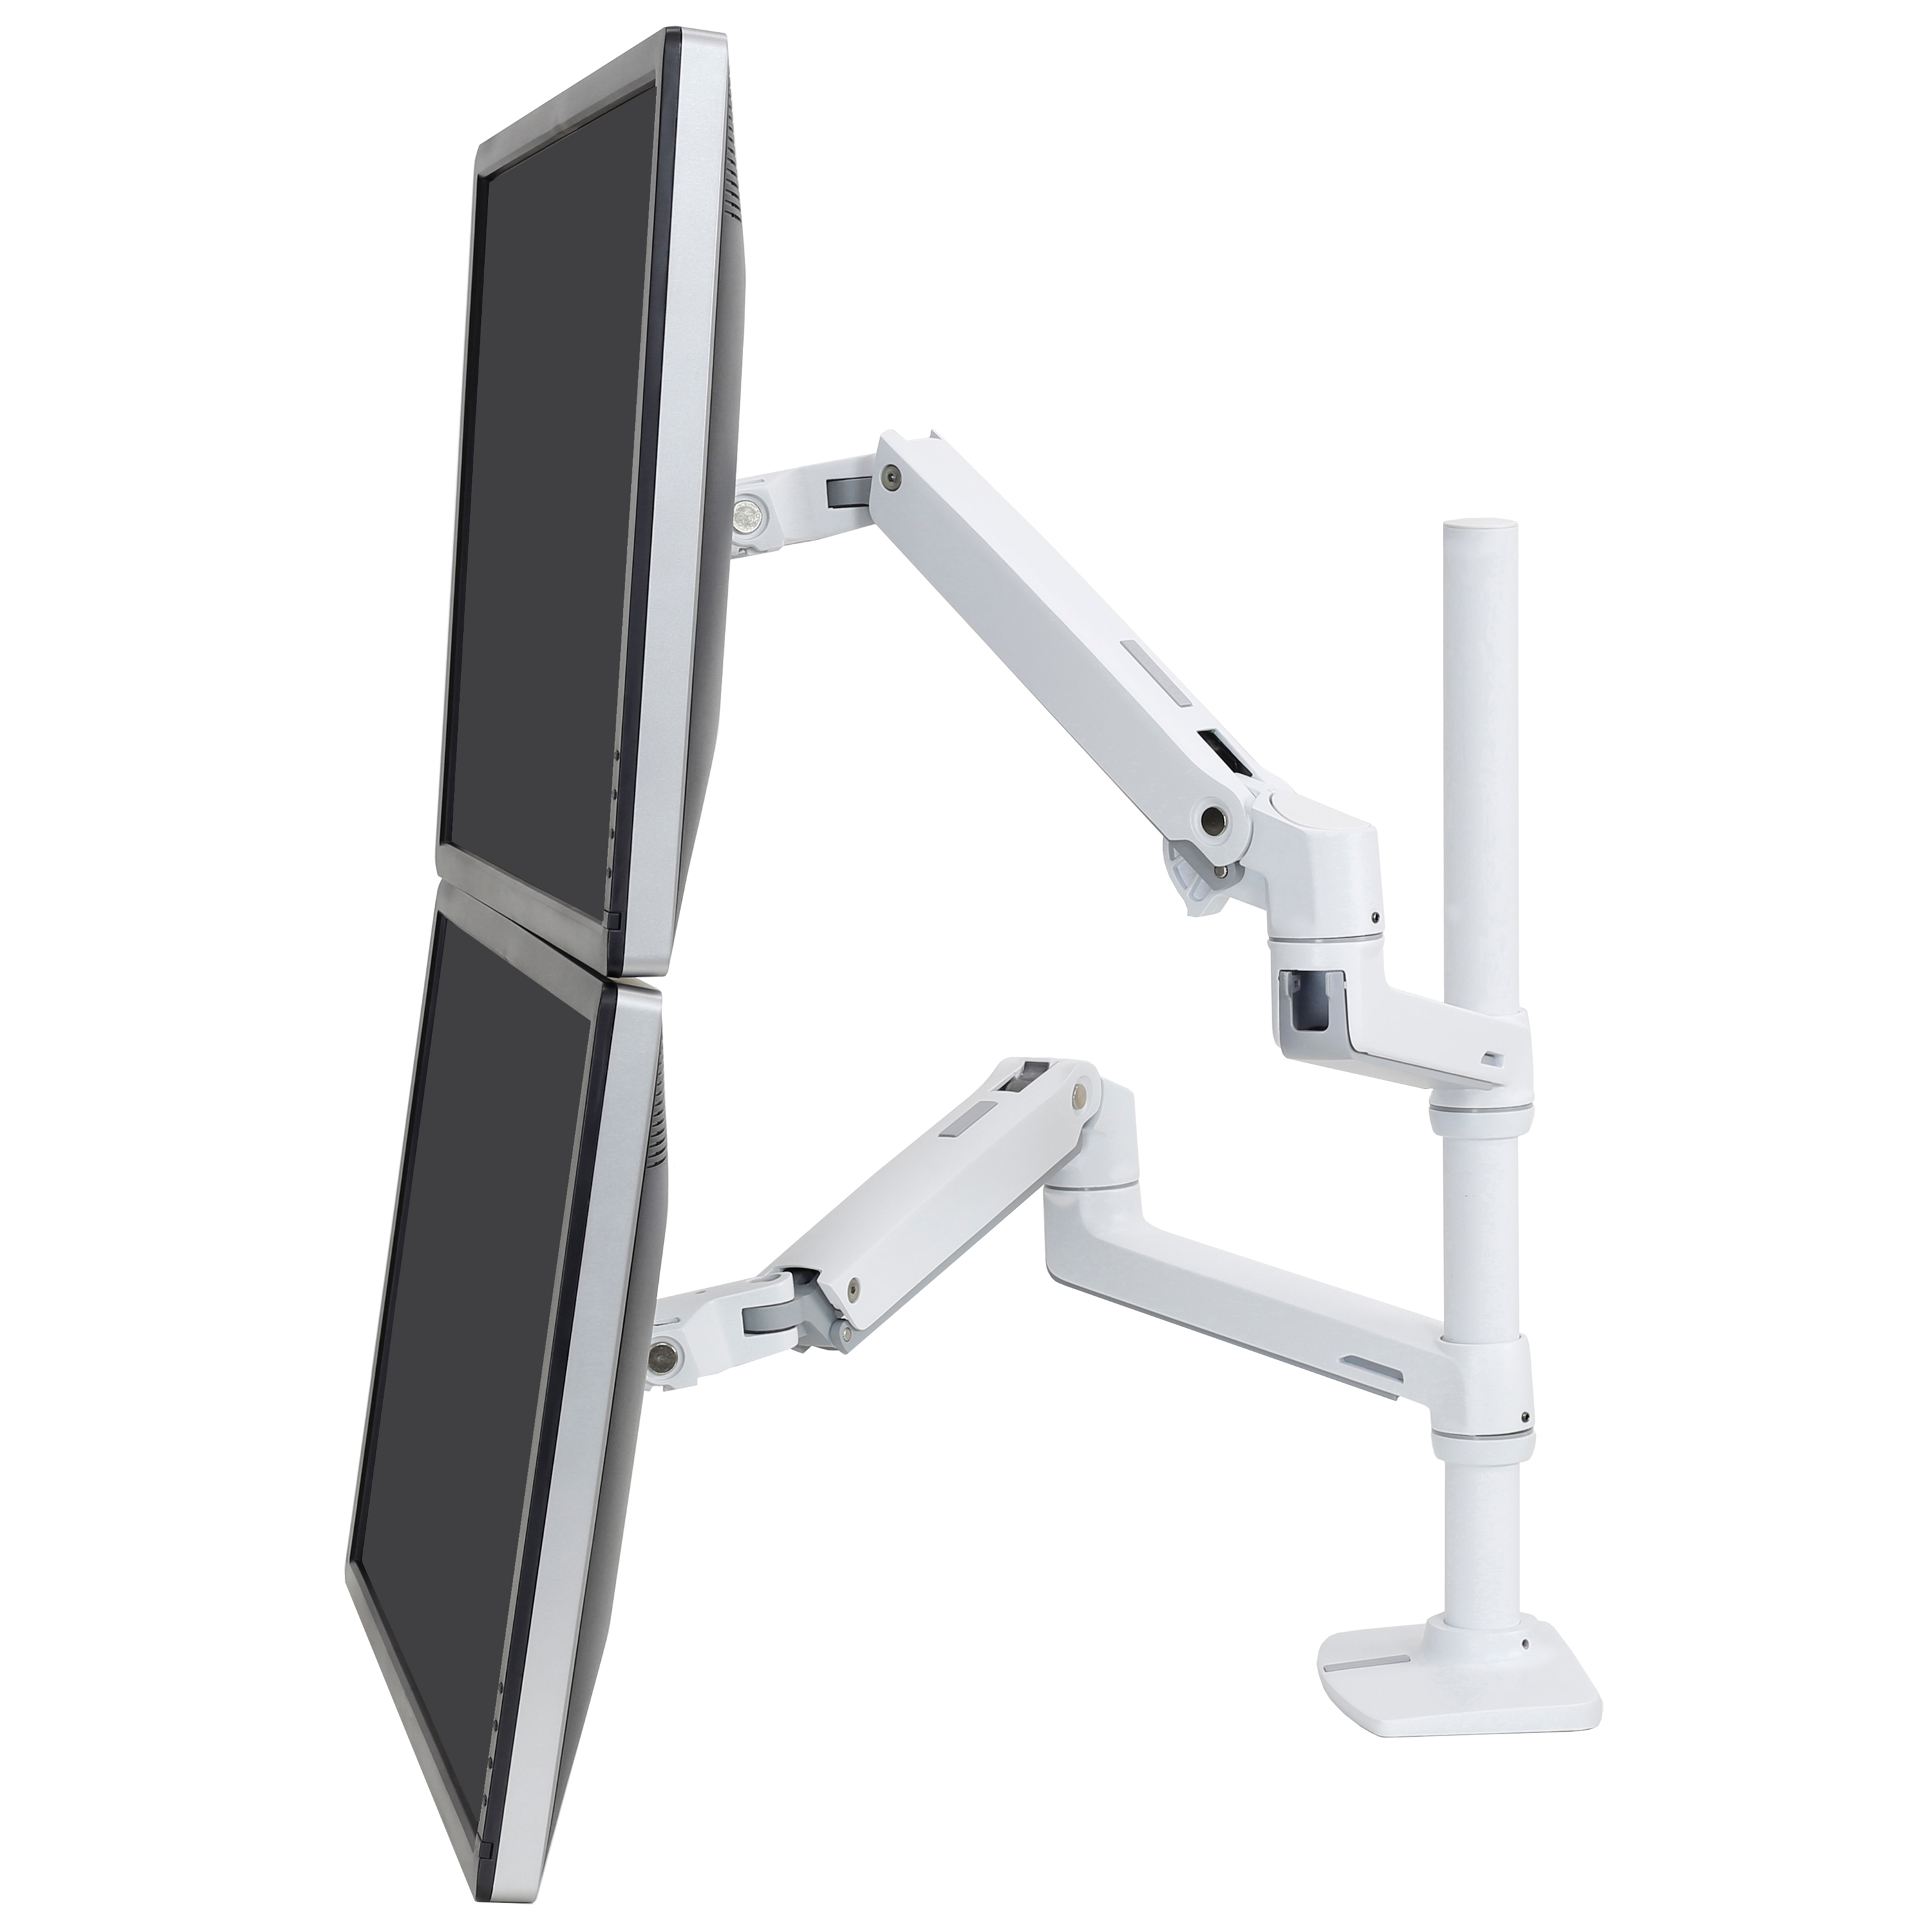 Ergotron 7 to 20 lbs Each for 2 Monitors Up to 27 Inches Matte Black  VESA Desk Mount LX Dual Monitor Arm 